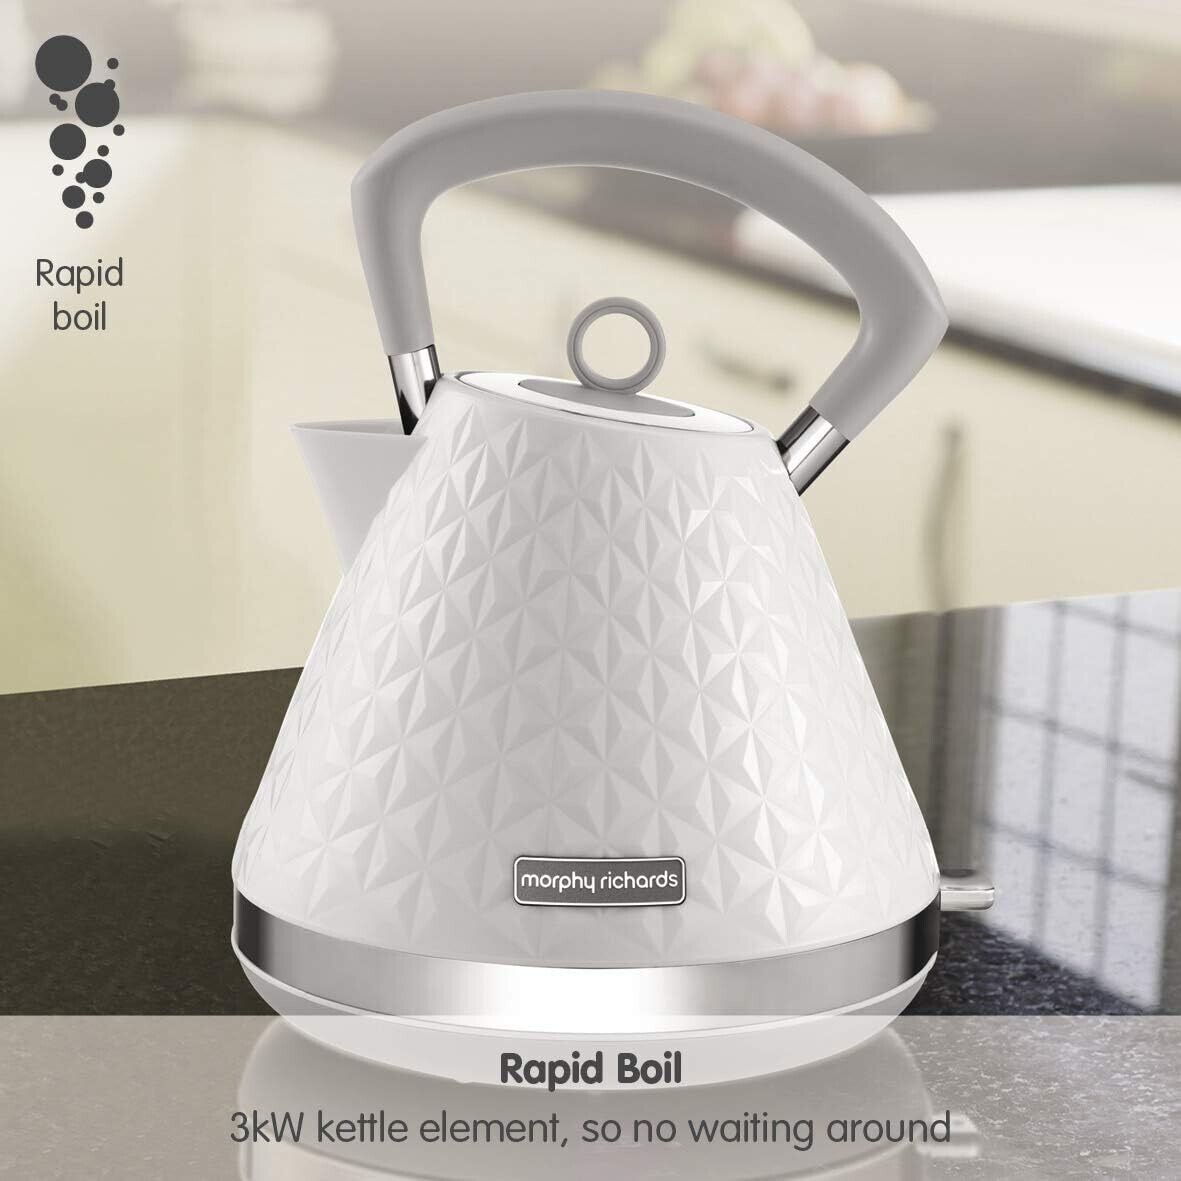 Morphy Richards White 1.5L 3KW Pyramid Kettle, 4 Slice Toaster & Dimensions Canisters, Mug Tree & Towel Pole Matching Set